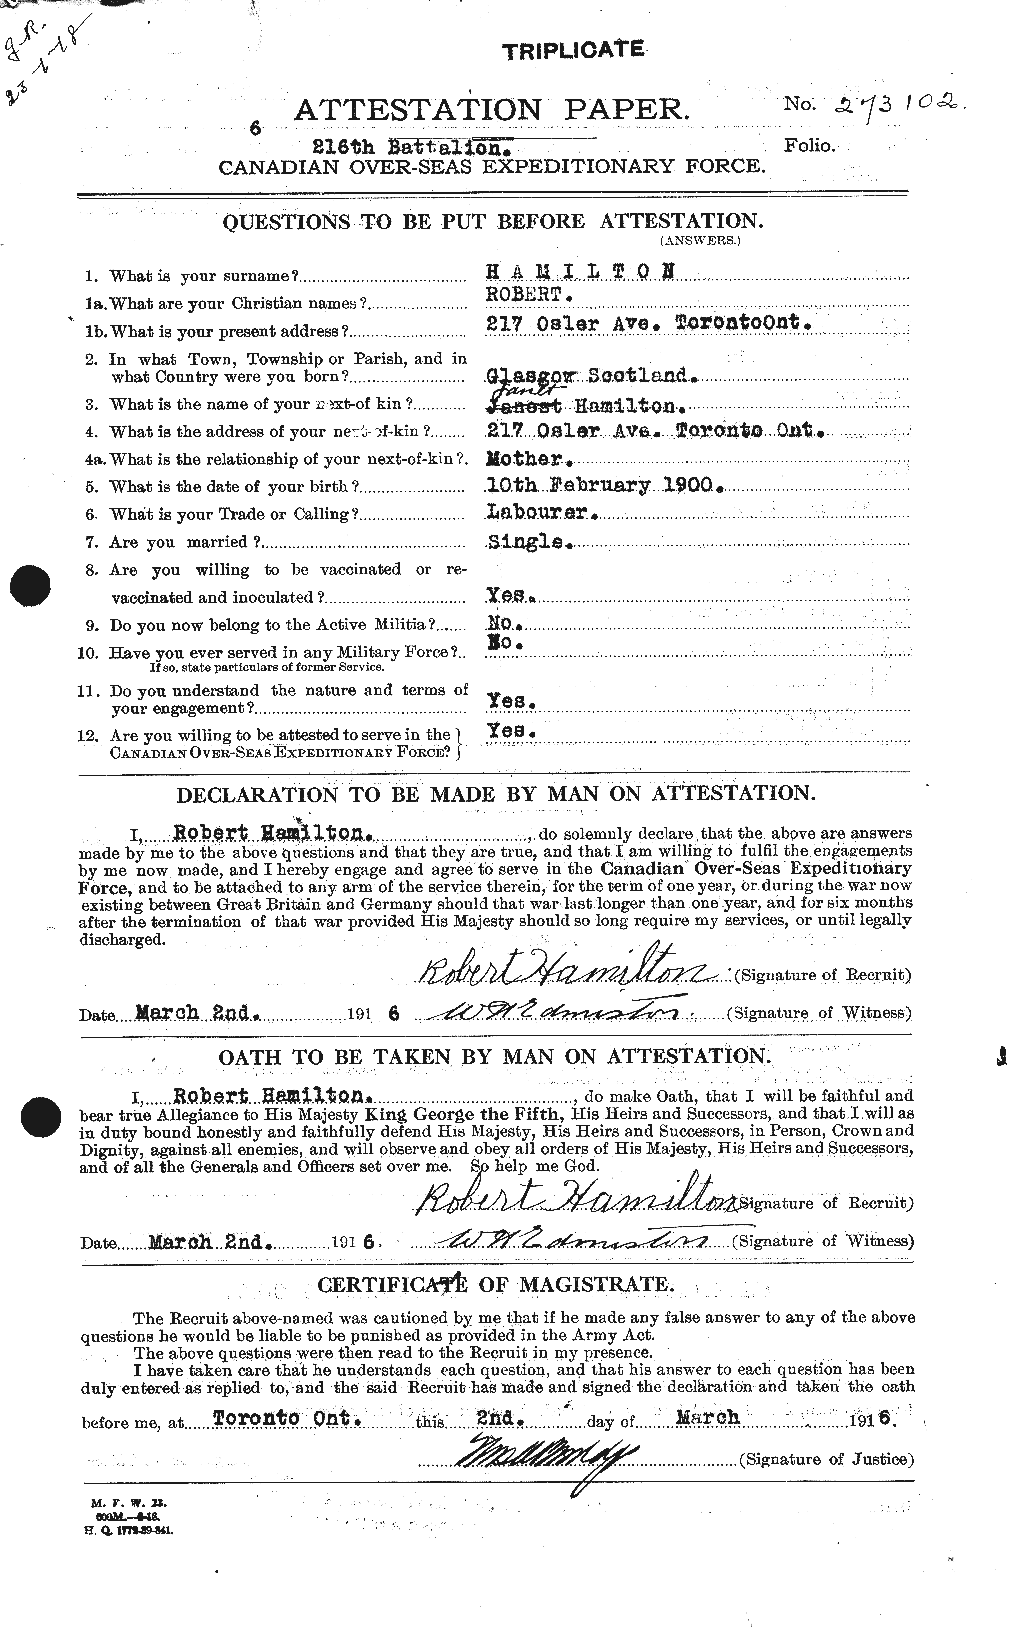 Personnel Records of the First World War - CEF 373235a